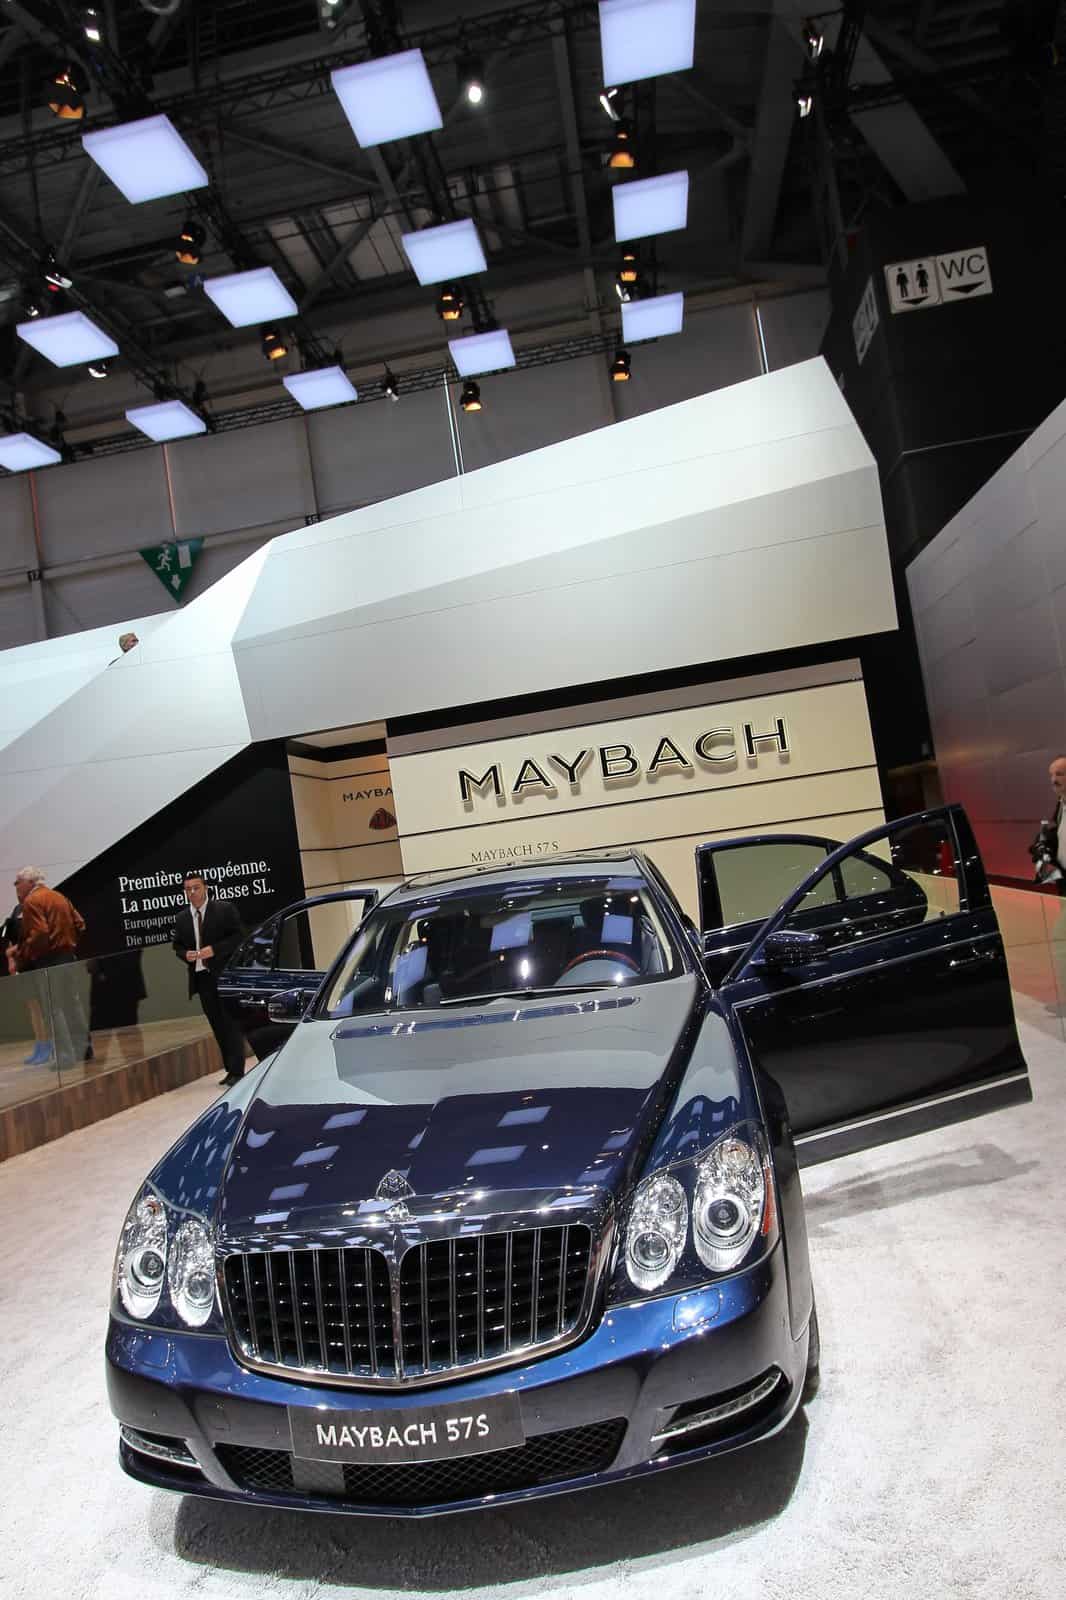 History of Luxurious Cars: Maybach &#8211; All You Need to Know